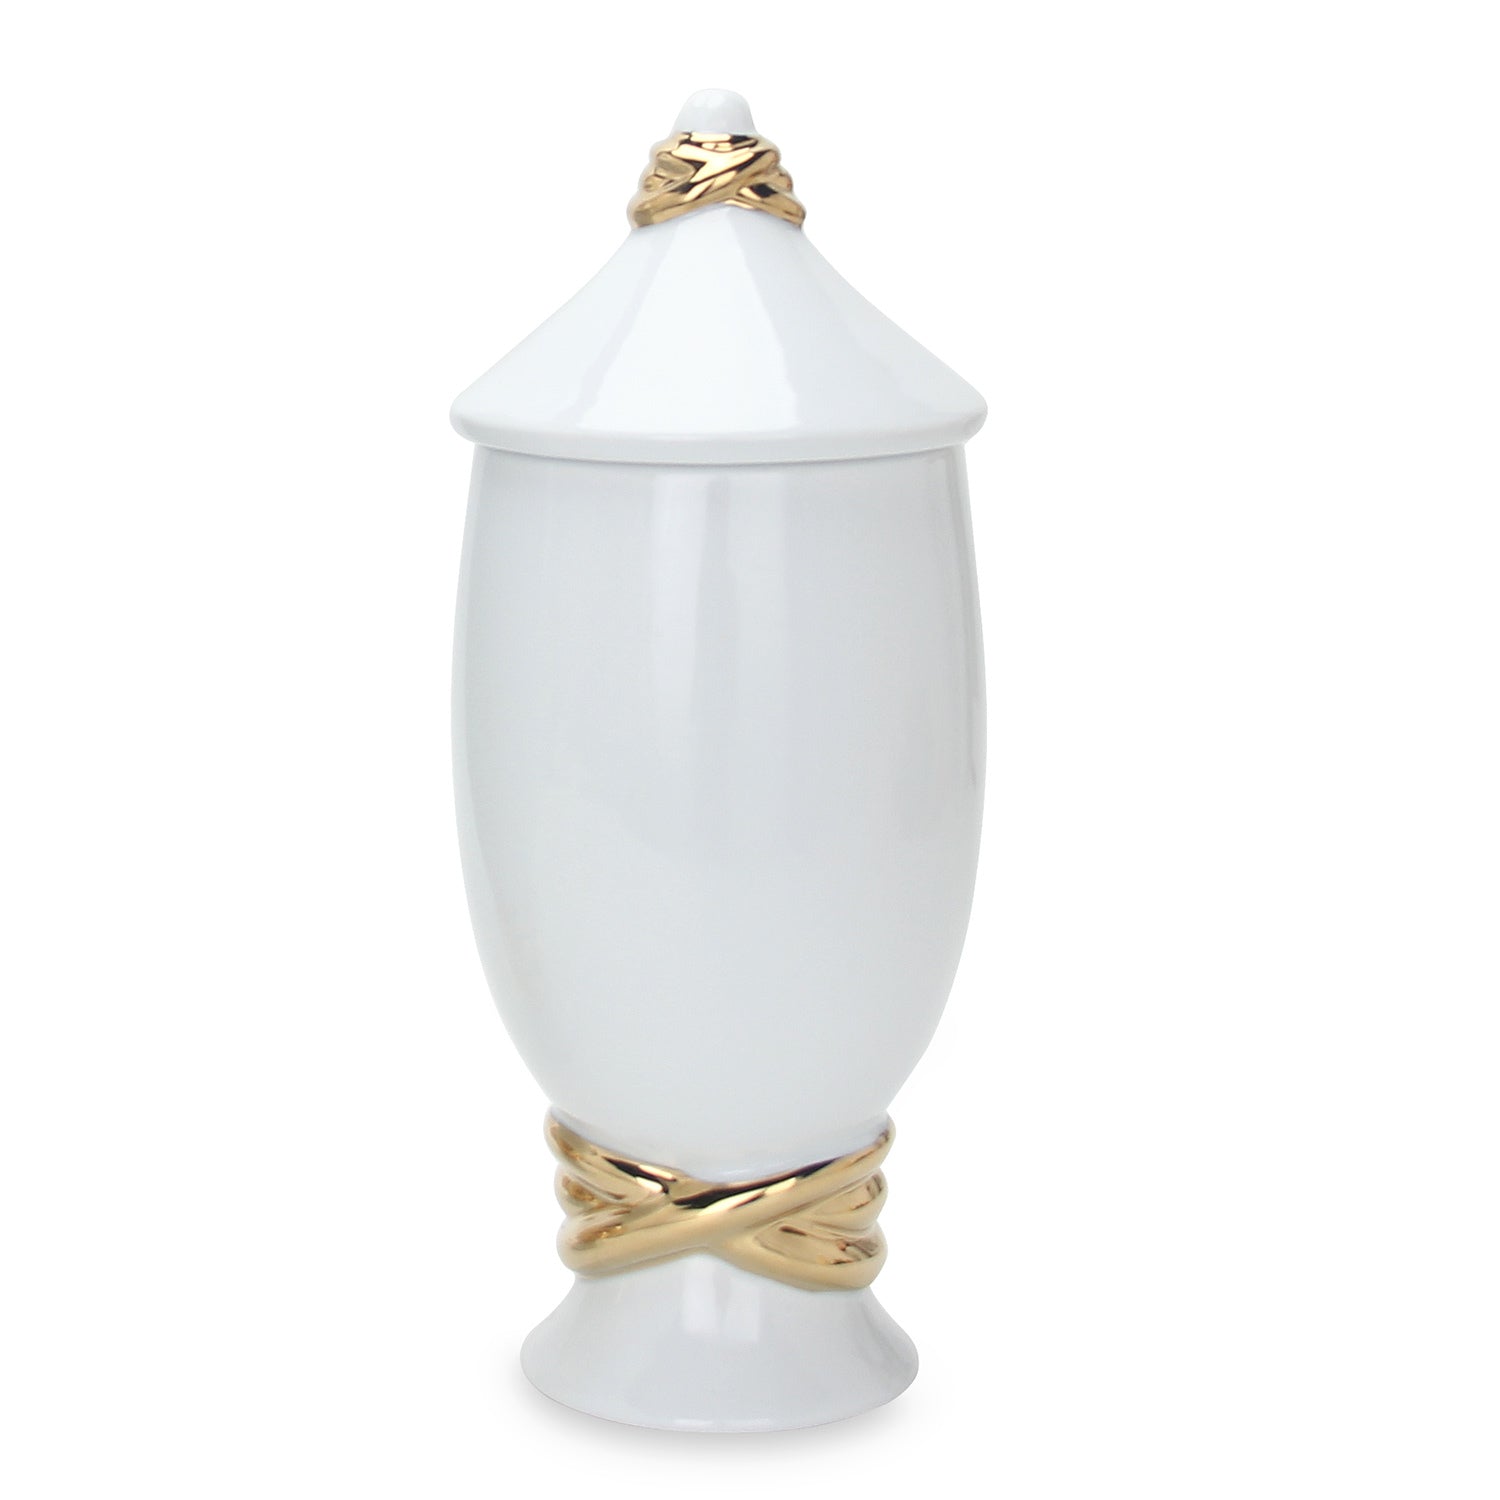 White Ceramic Decorative Jar with Gold Accent and Lid white-ceramic